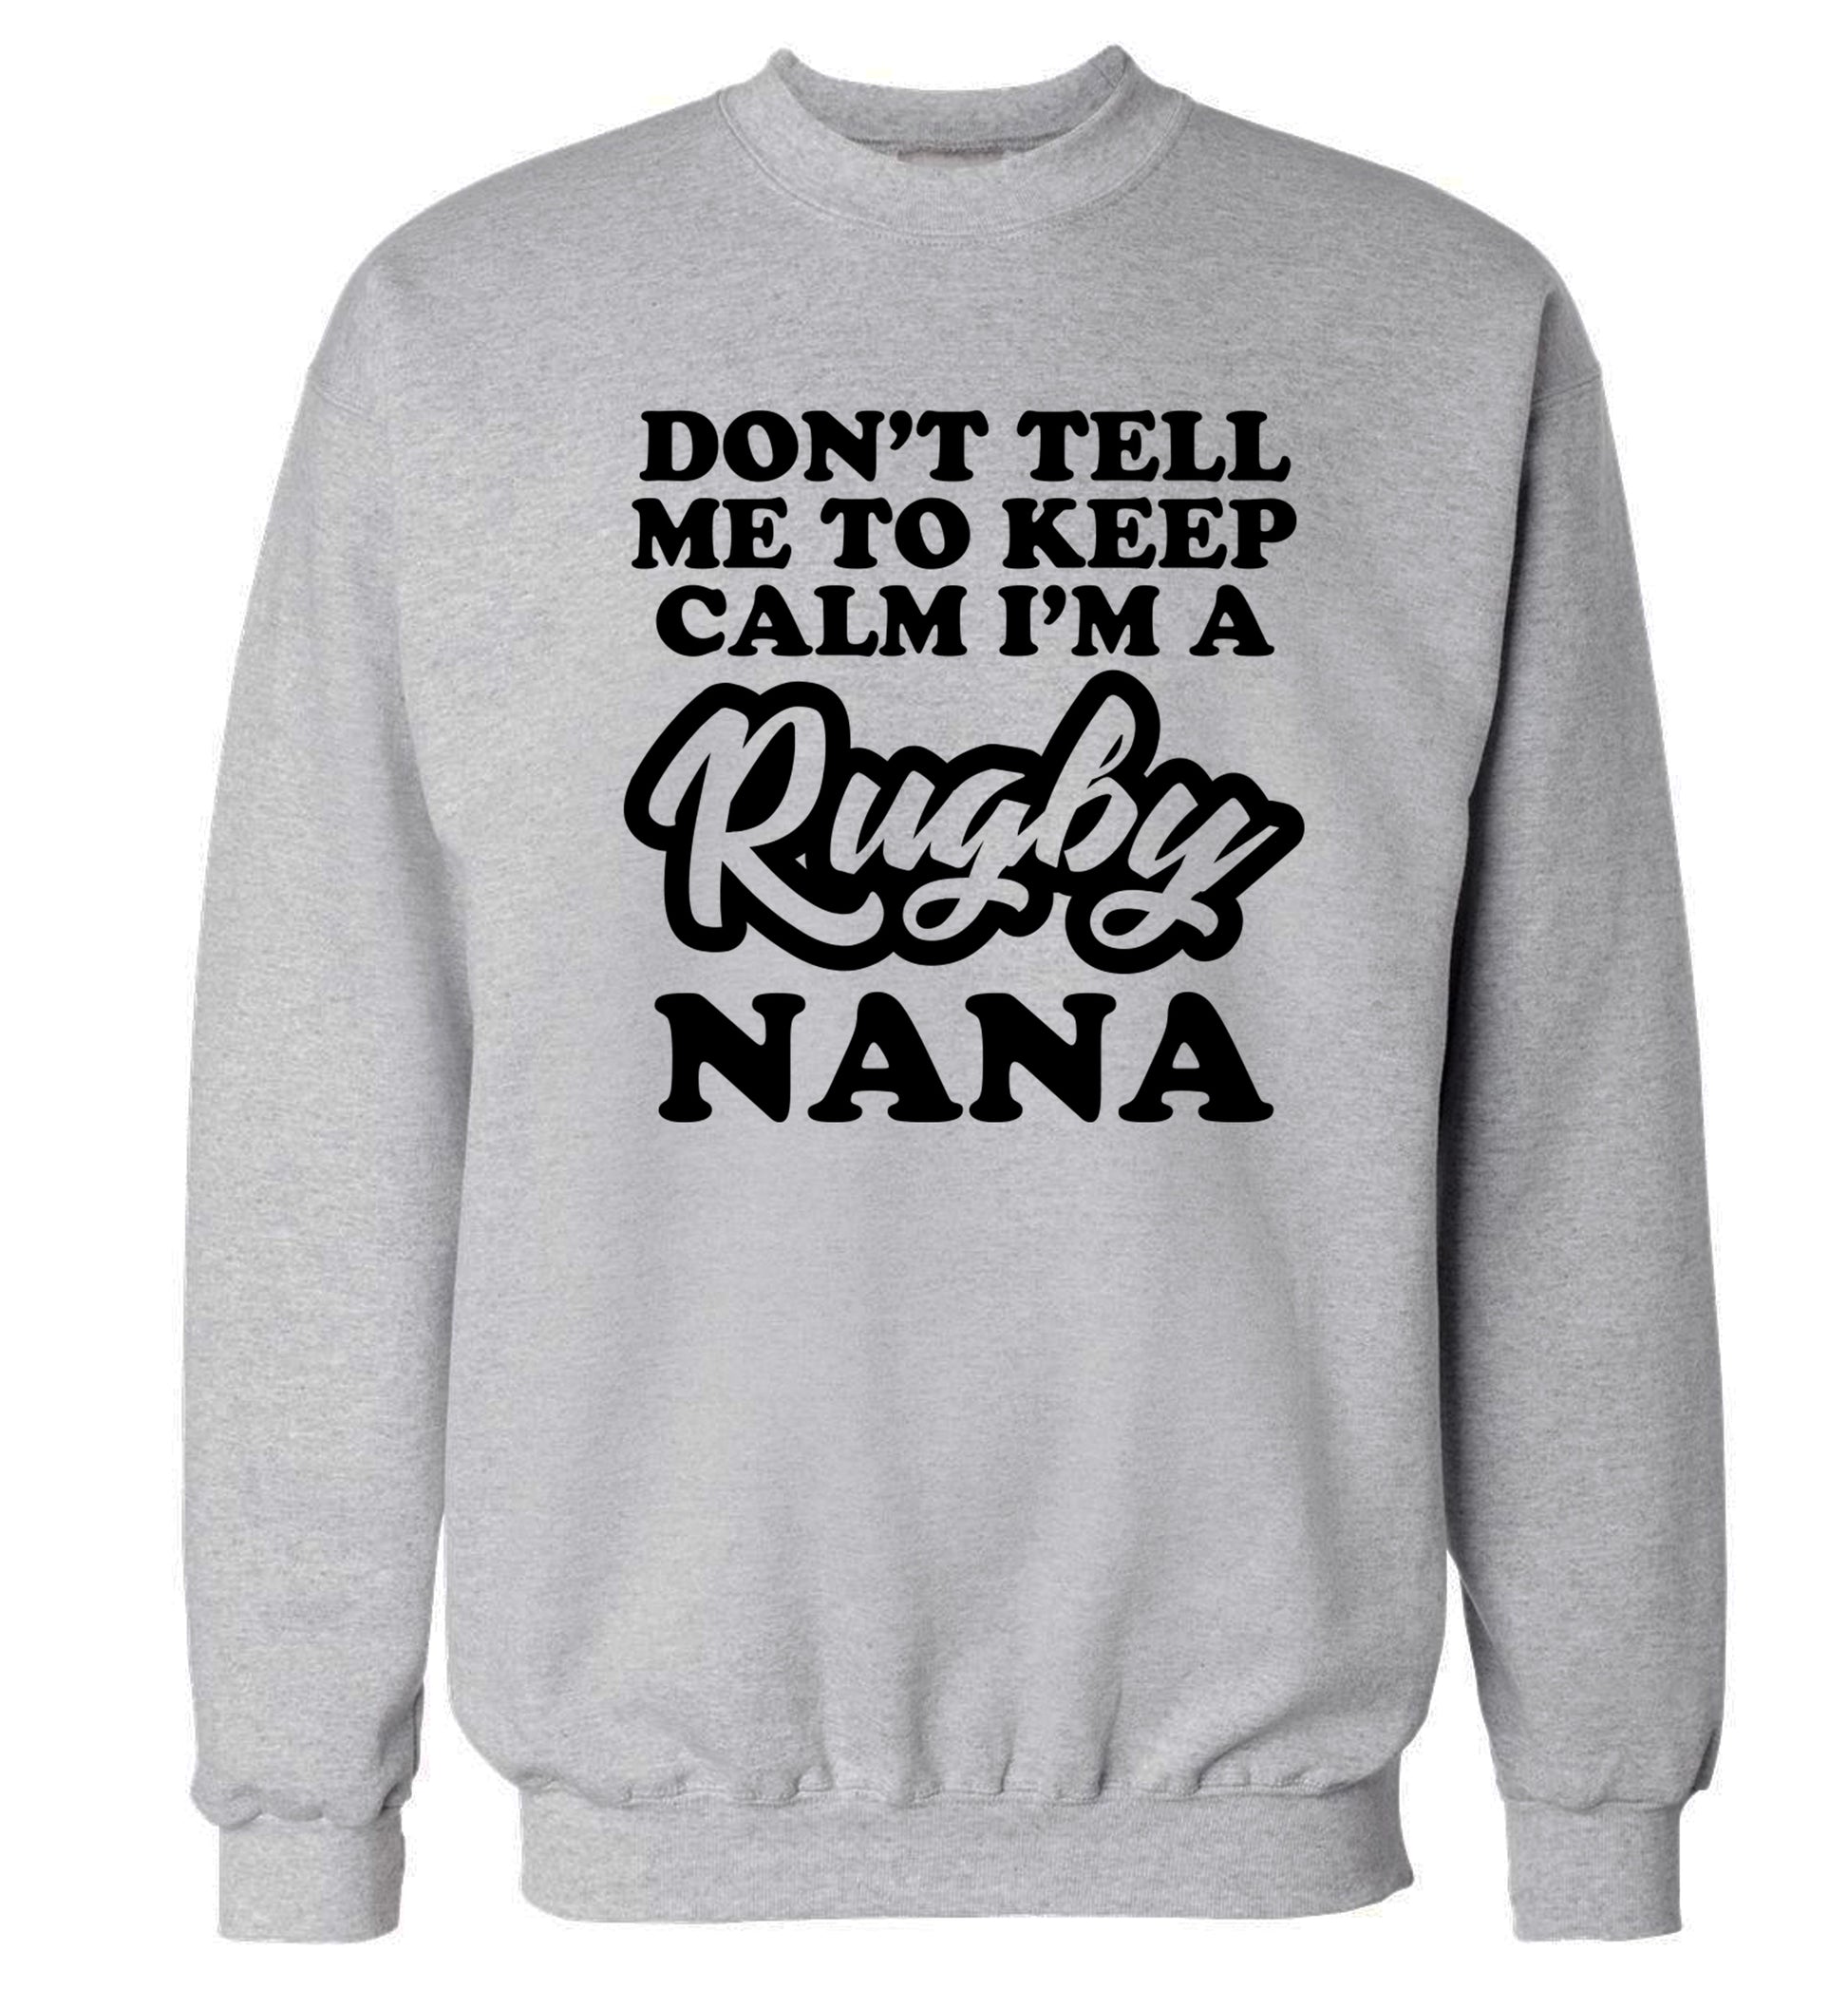 Don't tell me to keep calm I'm a rugby nana Adult's unisex grey Sweater 2XL